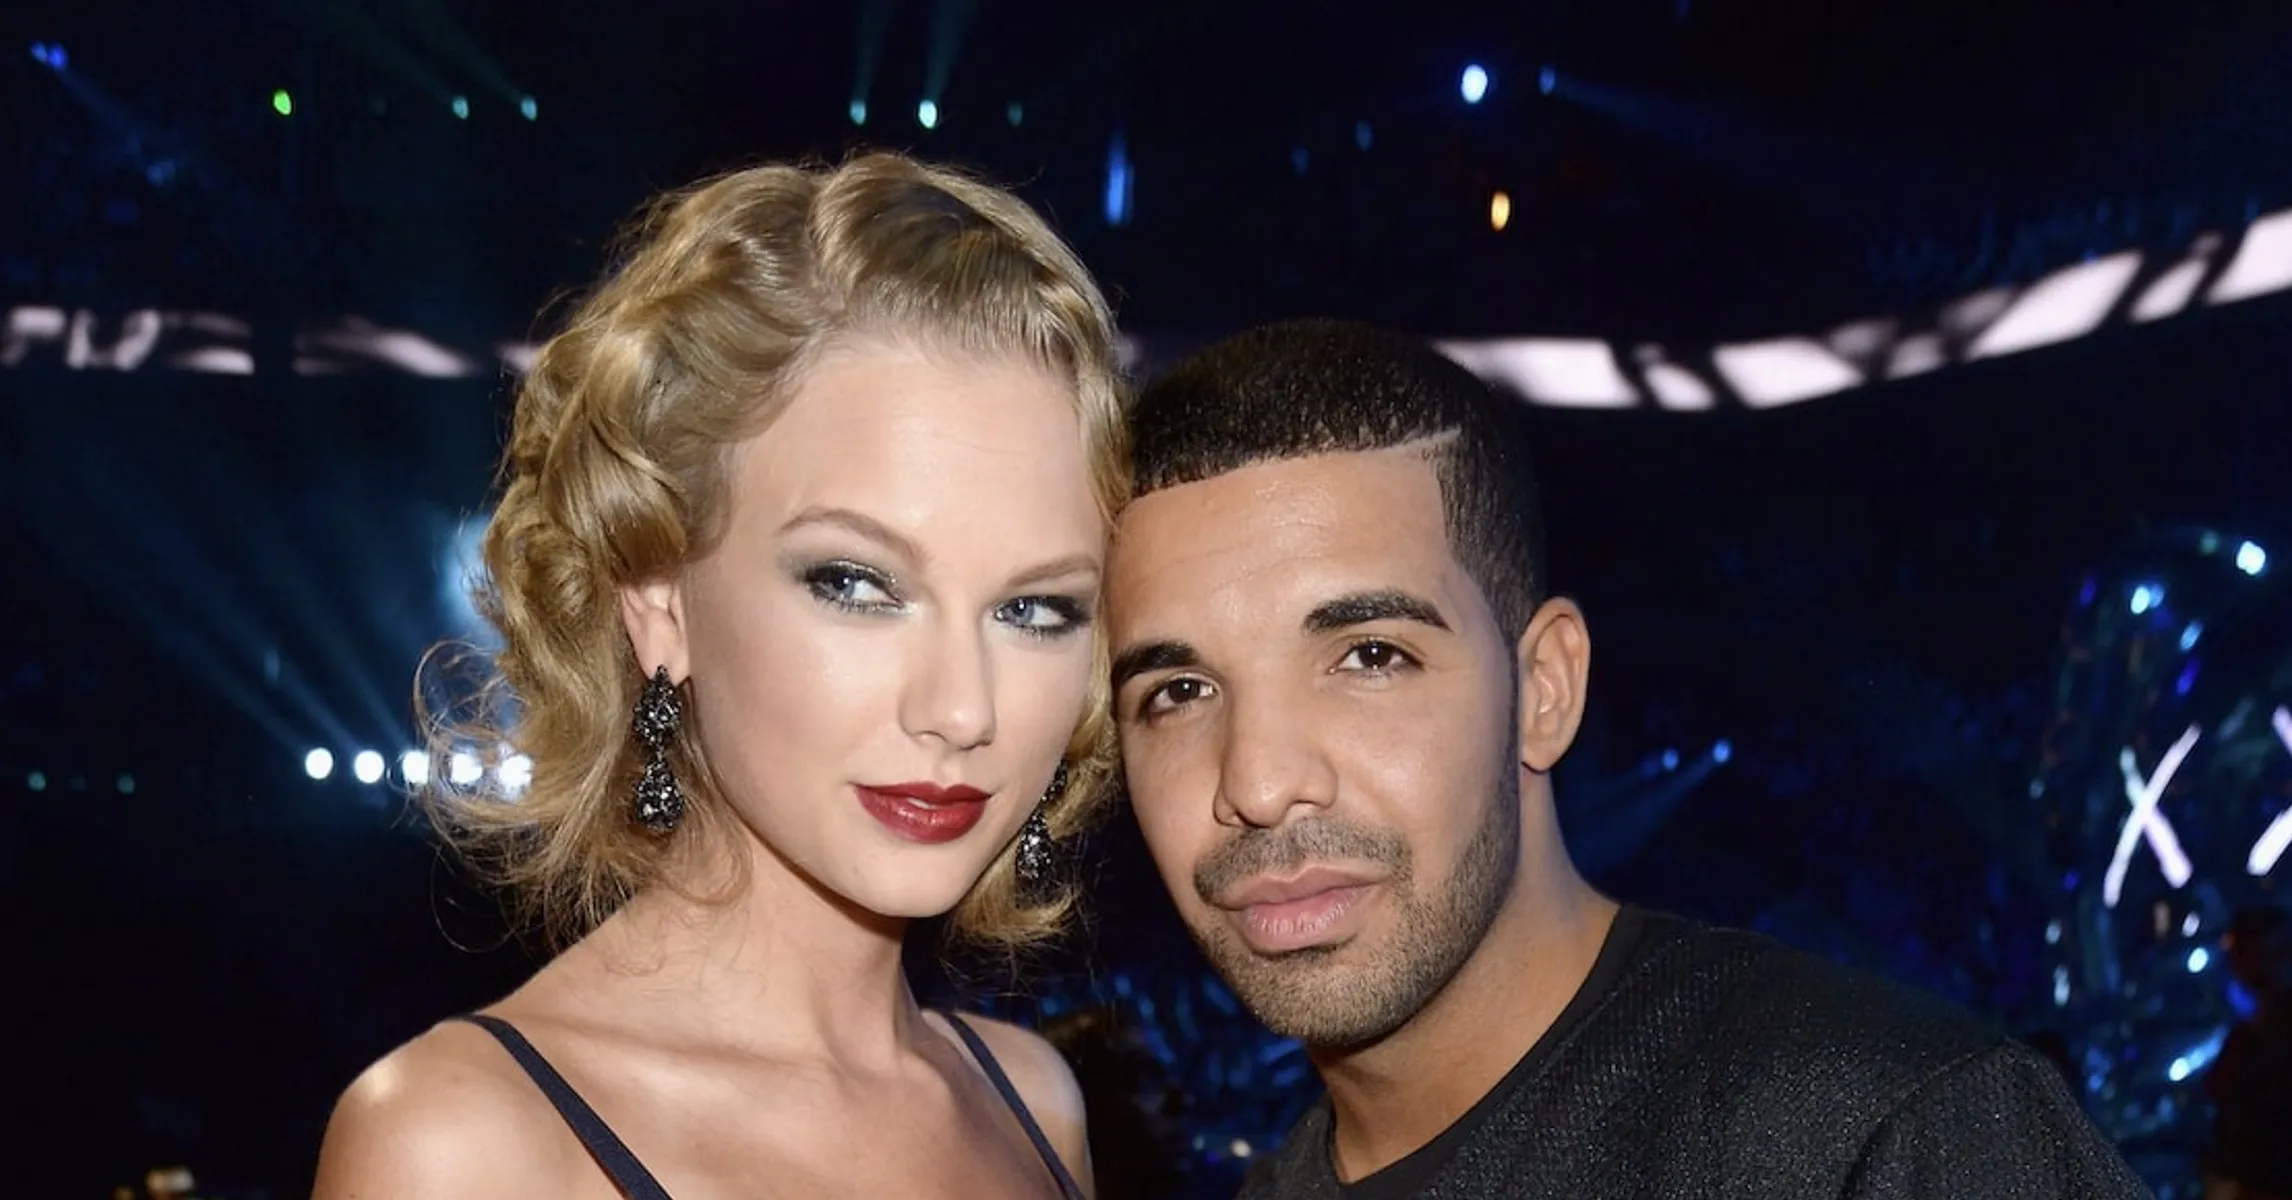 Drake Dethroned By Taylor Swift With Massive Album Streaming Record